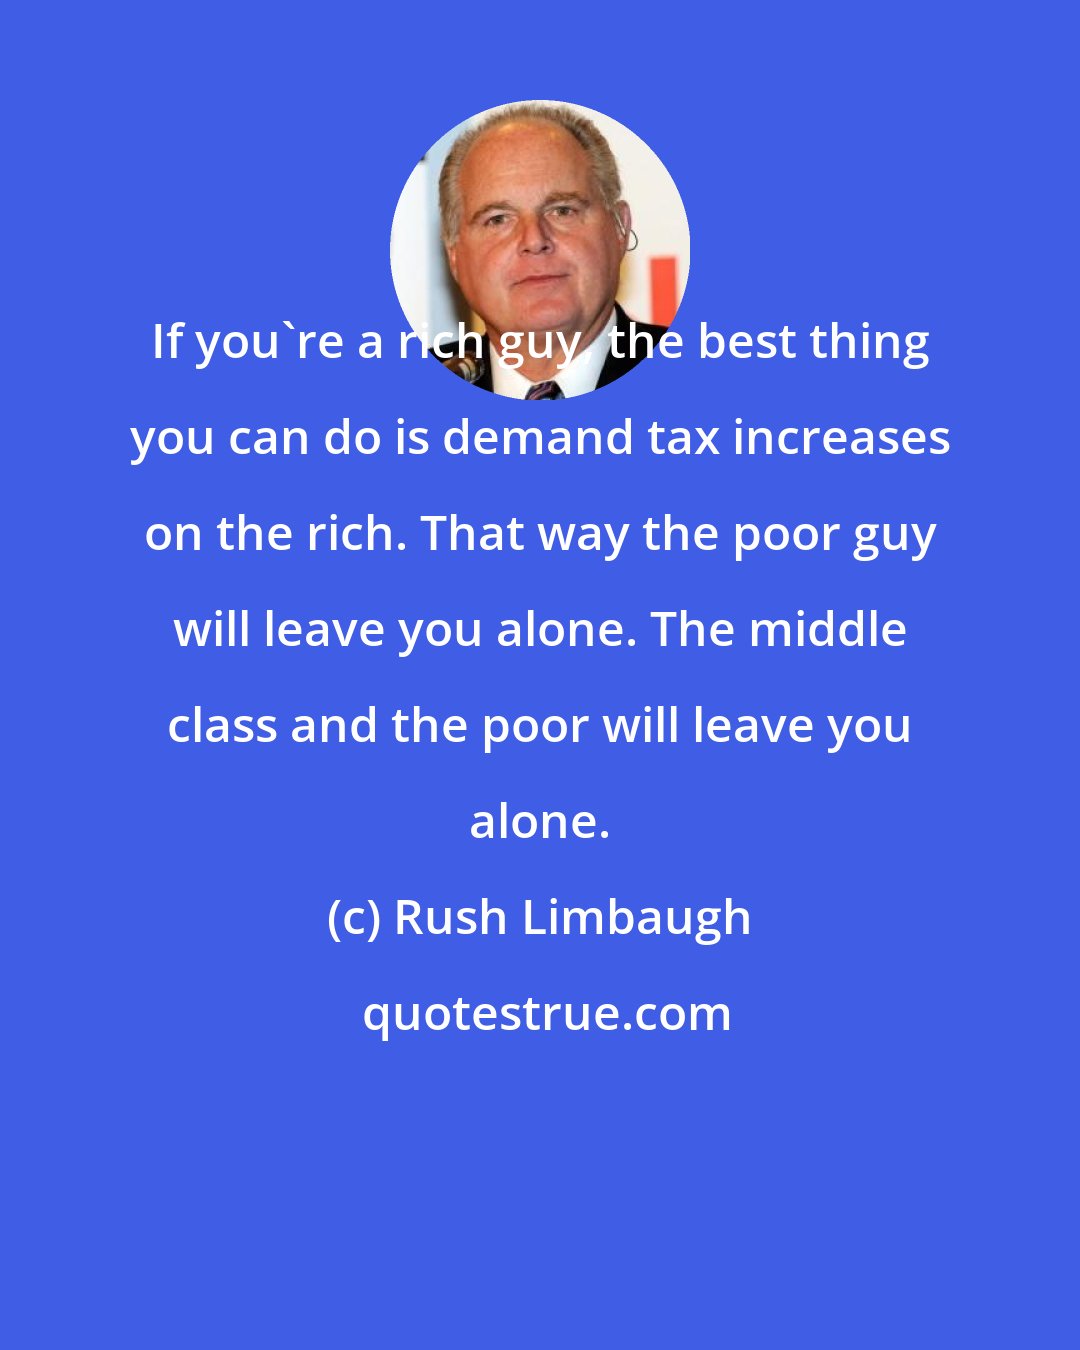 Rush Limbaugh: If you're a rich guy, the best thing you can do is demand tax increases on the rich. That way the poor guy will leave you alone. The middle class and the poor will leave you alone.